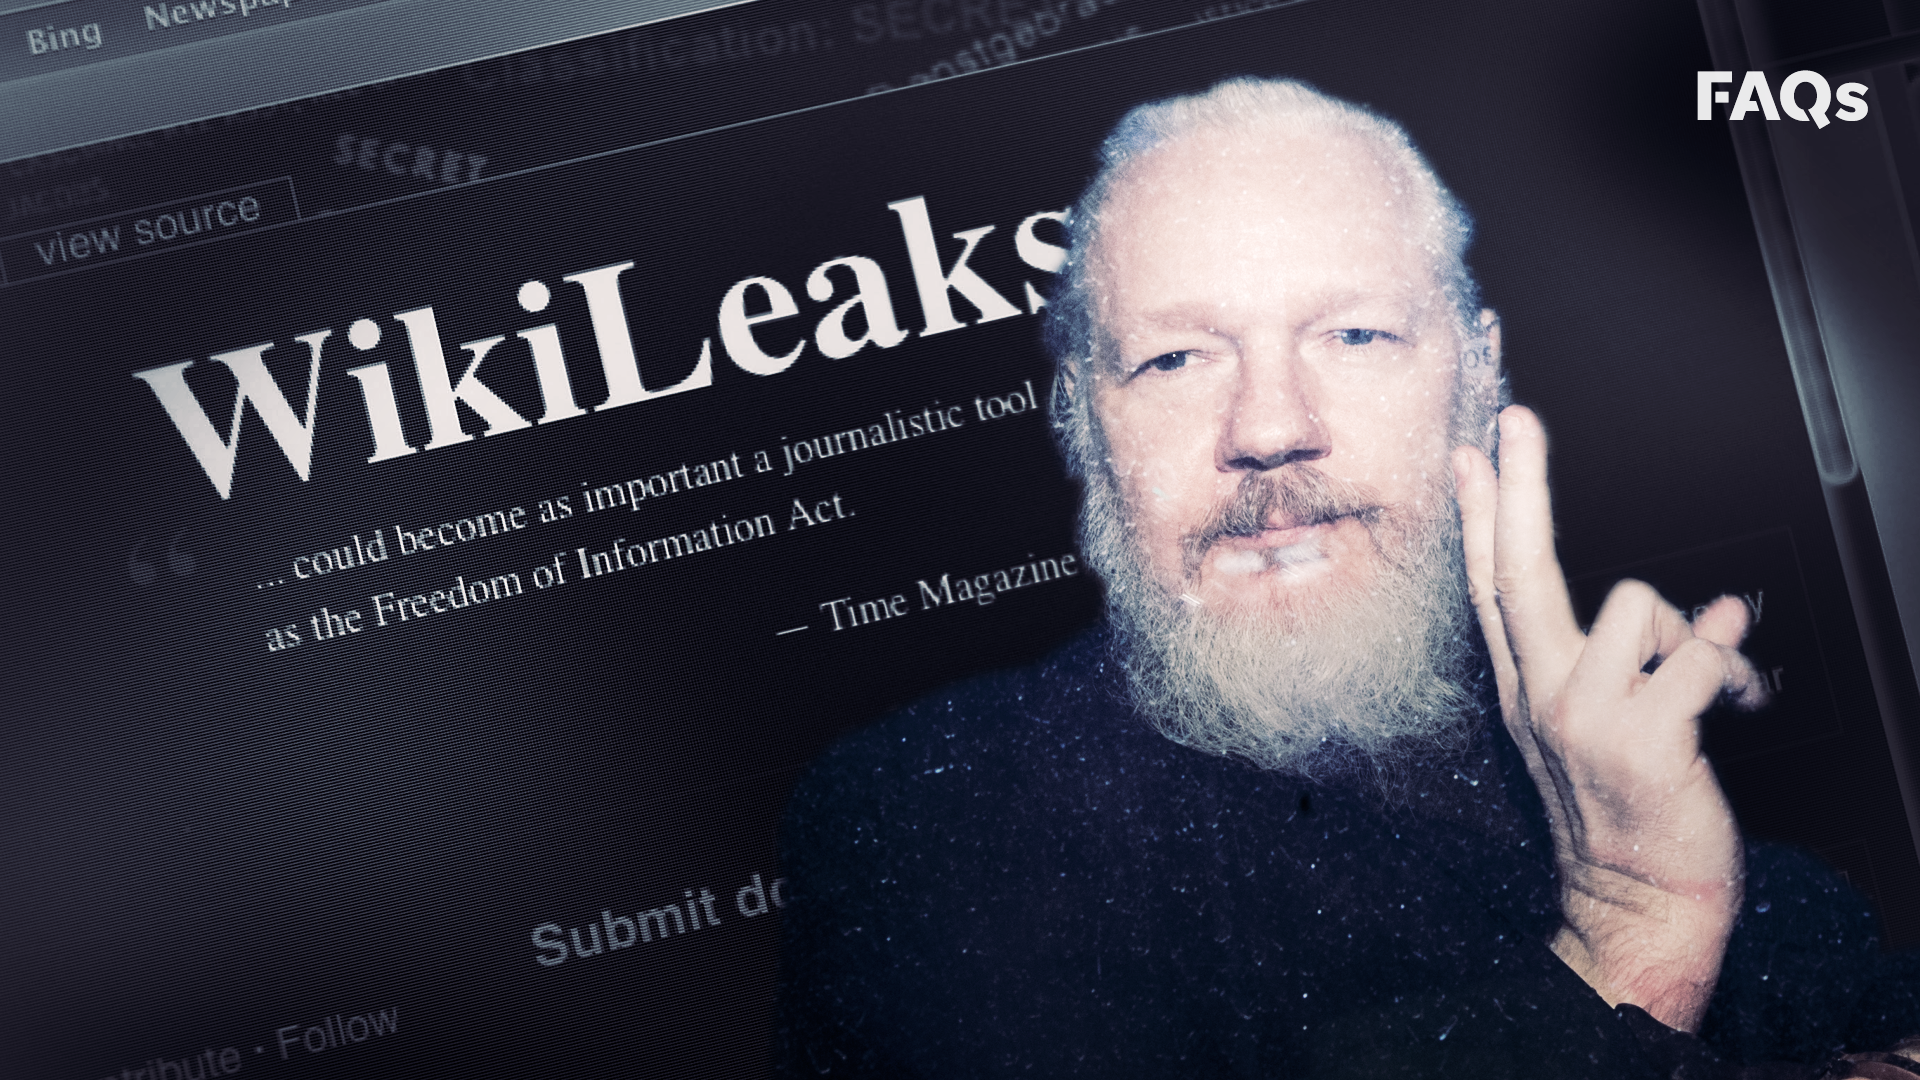 WikiLeaks says Swedish probe will allow Assange to clear his name